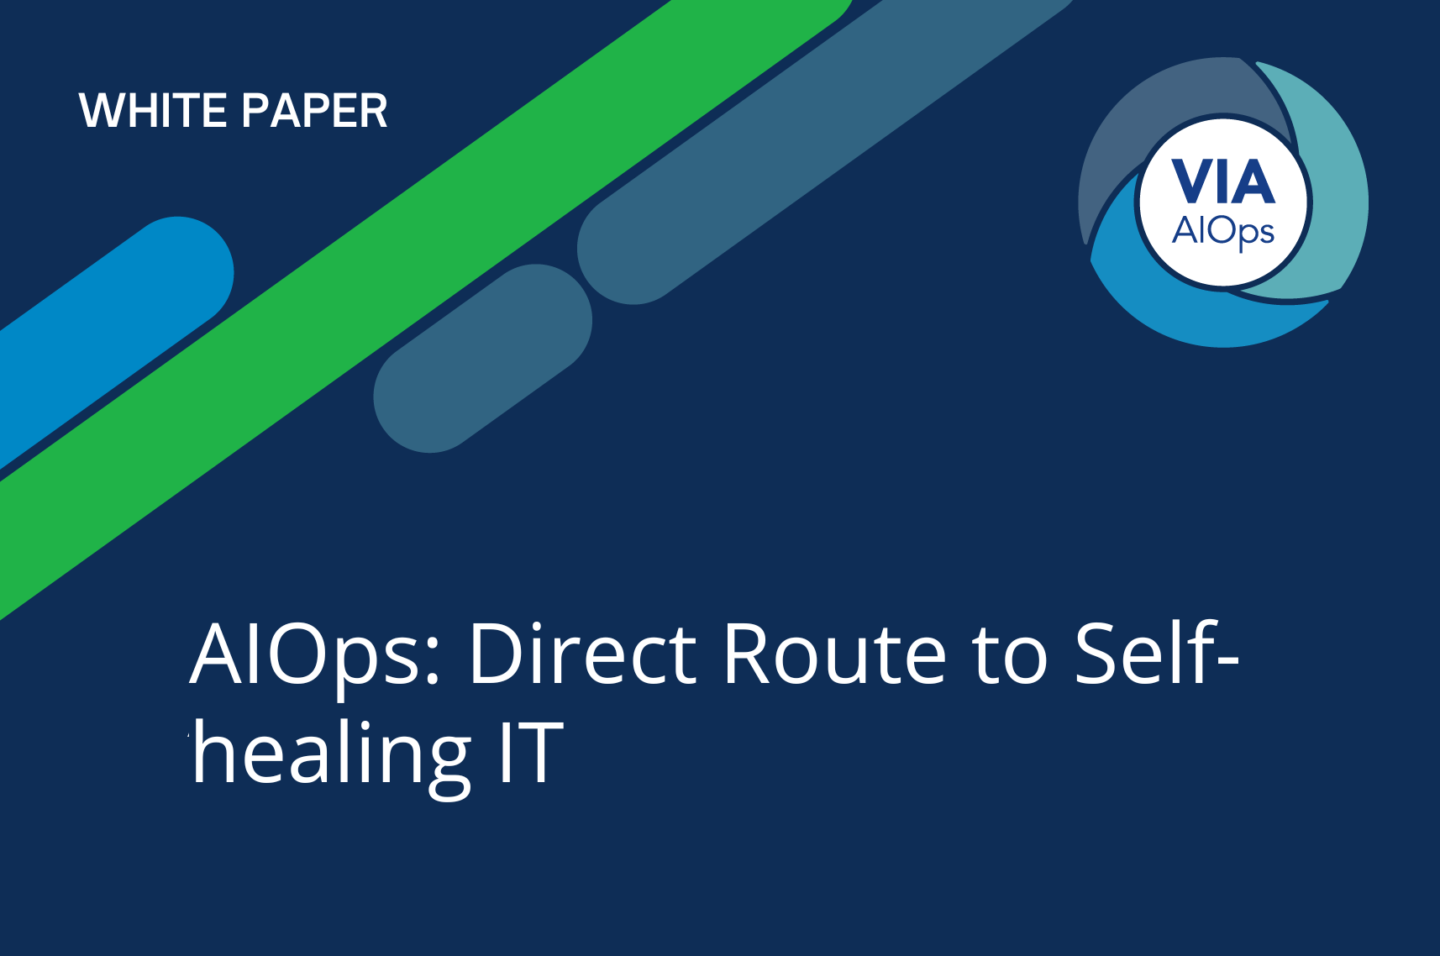 Banner for AIOps - Direct Route to Self-healing IT